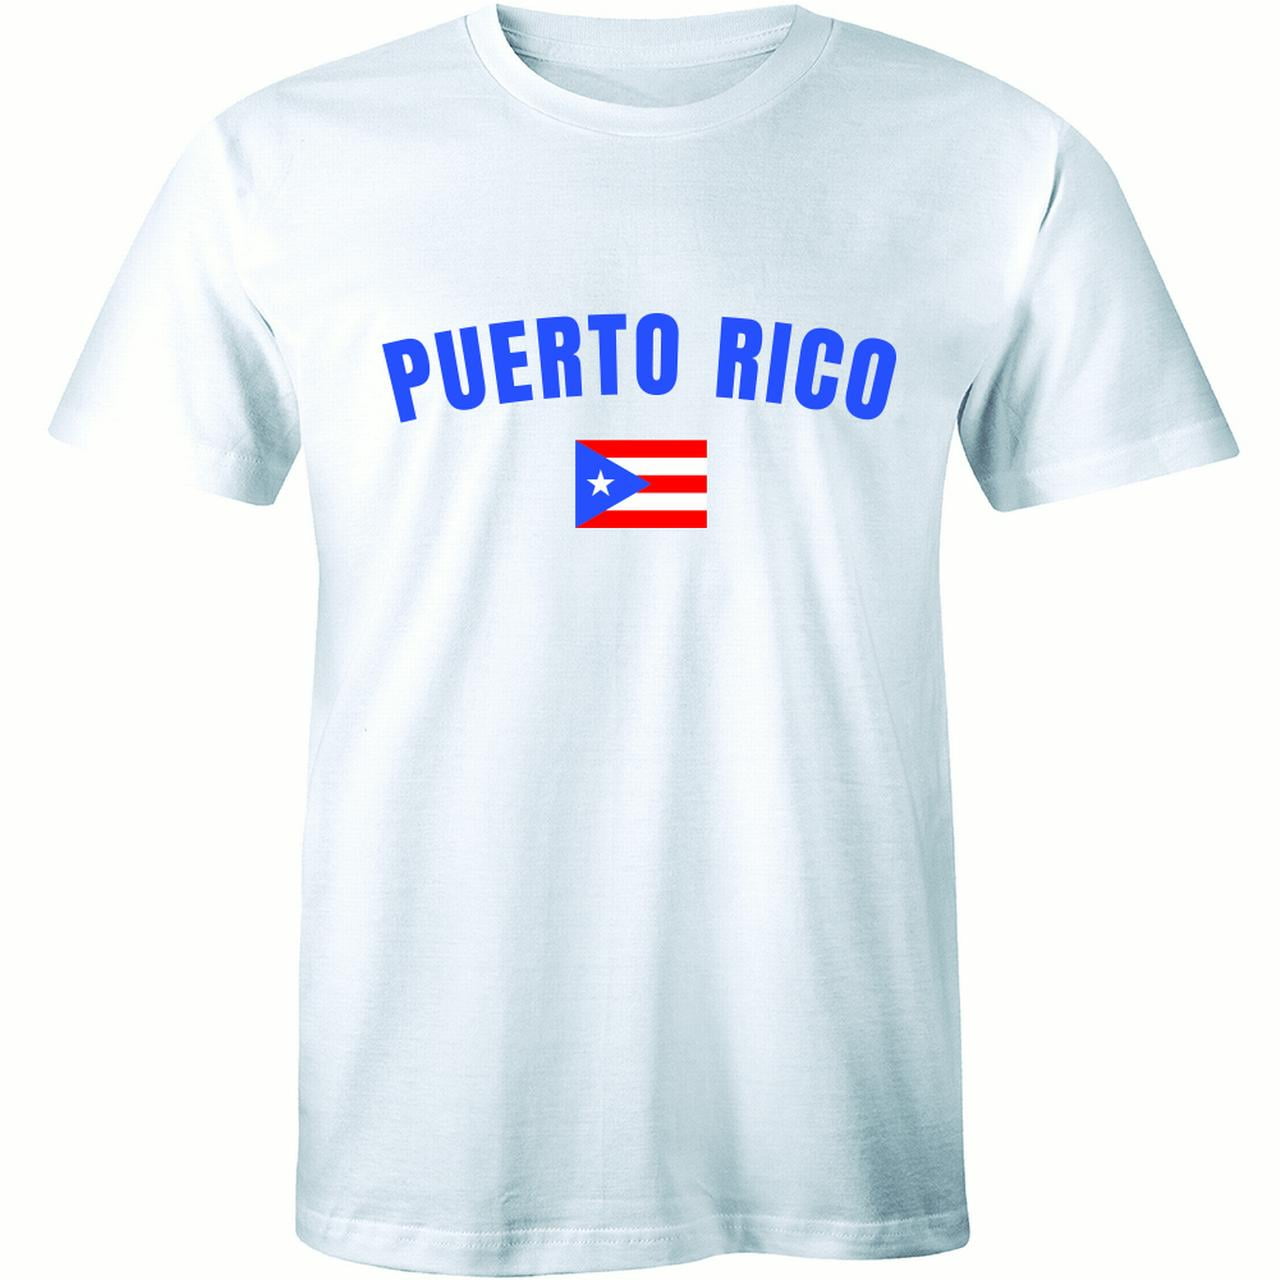 Kids Or Little Boys and Girls Tree Frog Playing Puerto Rico Flag Guitar Unisex Childrens Short Sleeve T-Shirt